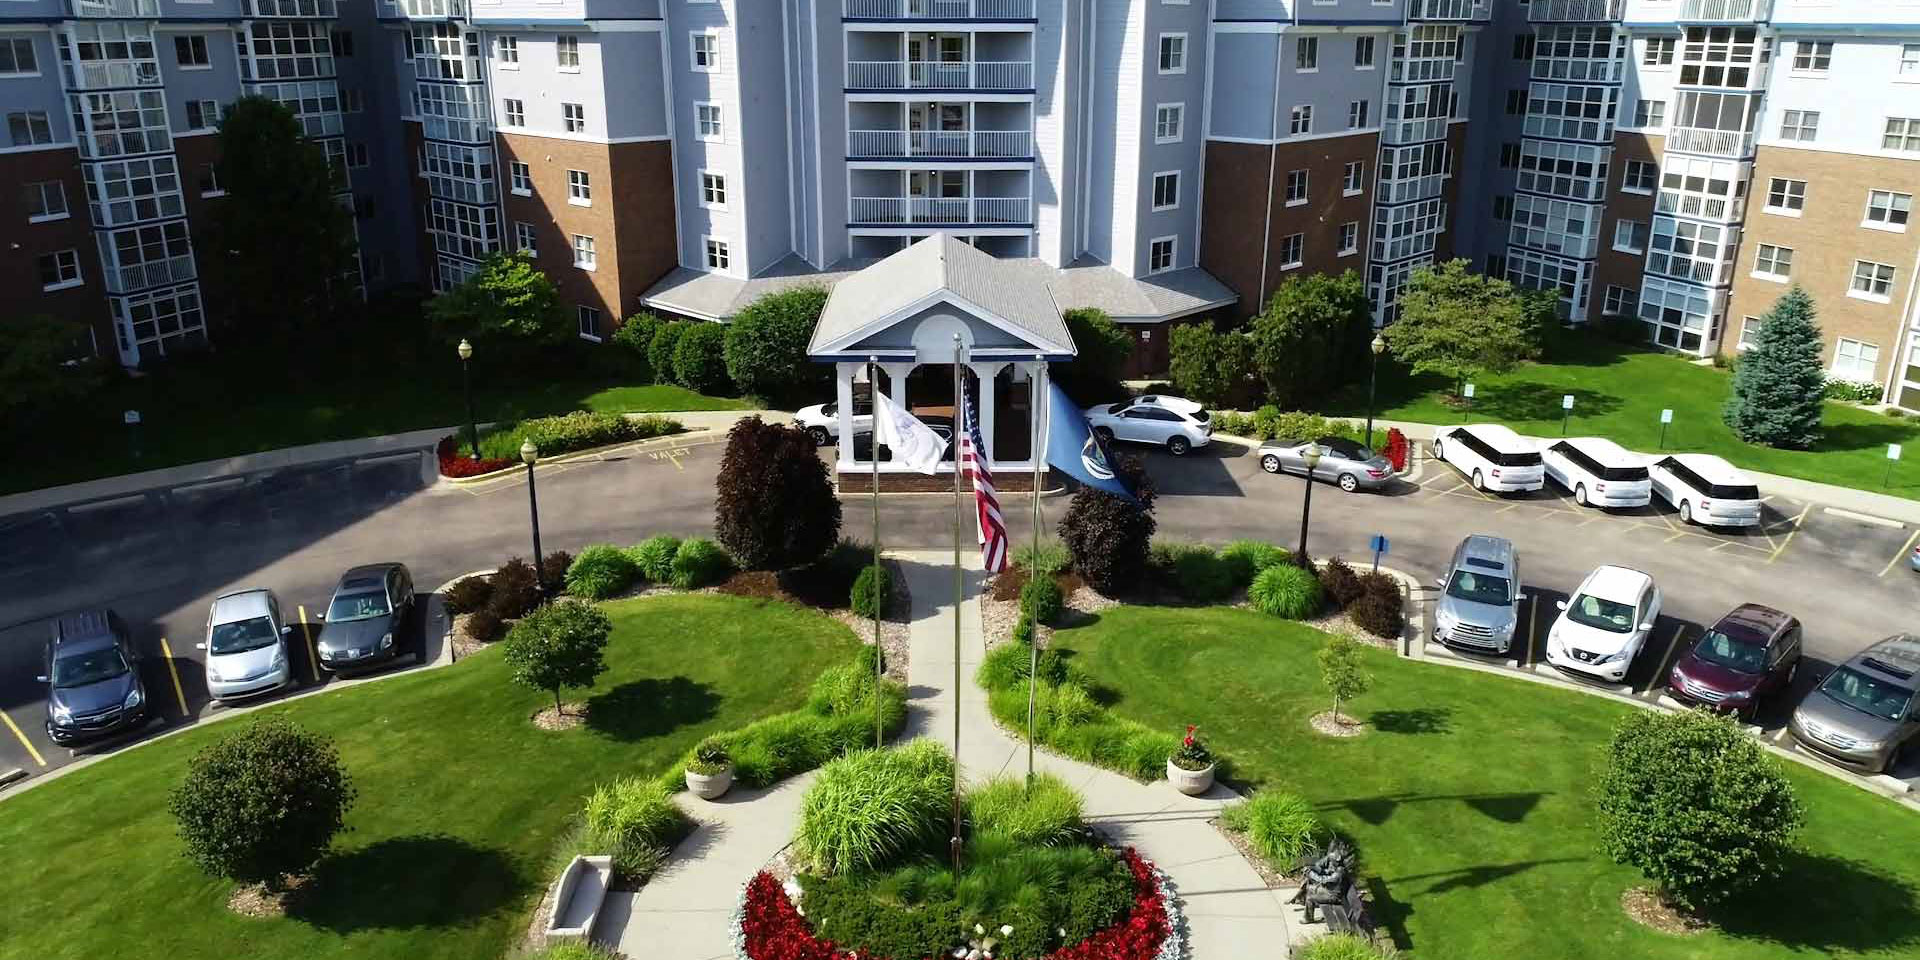 Welcome to Freedom Village Holland Senior Living Community